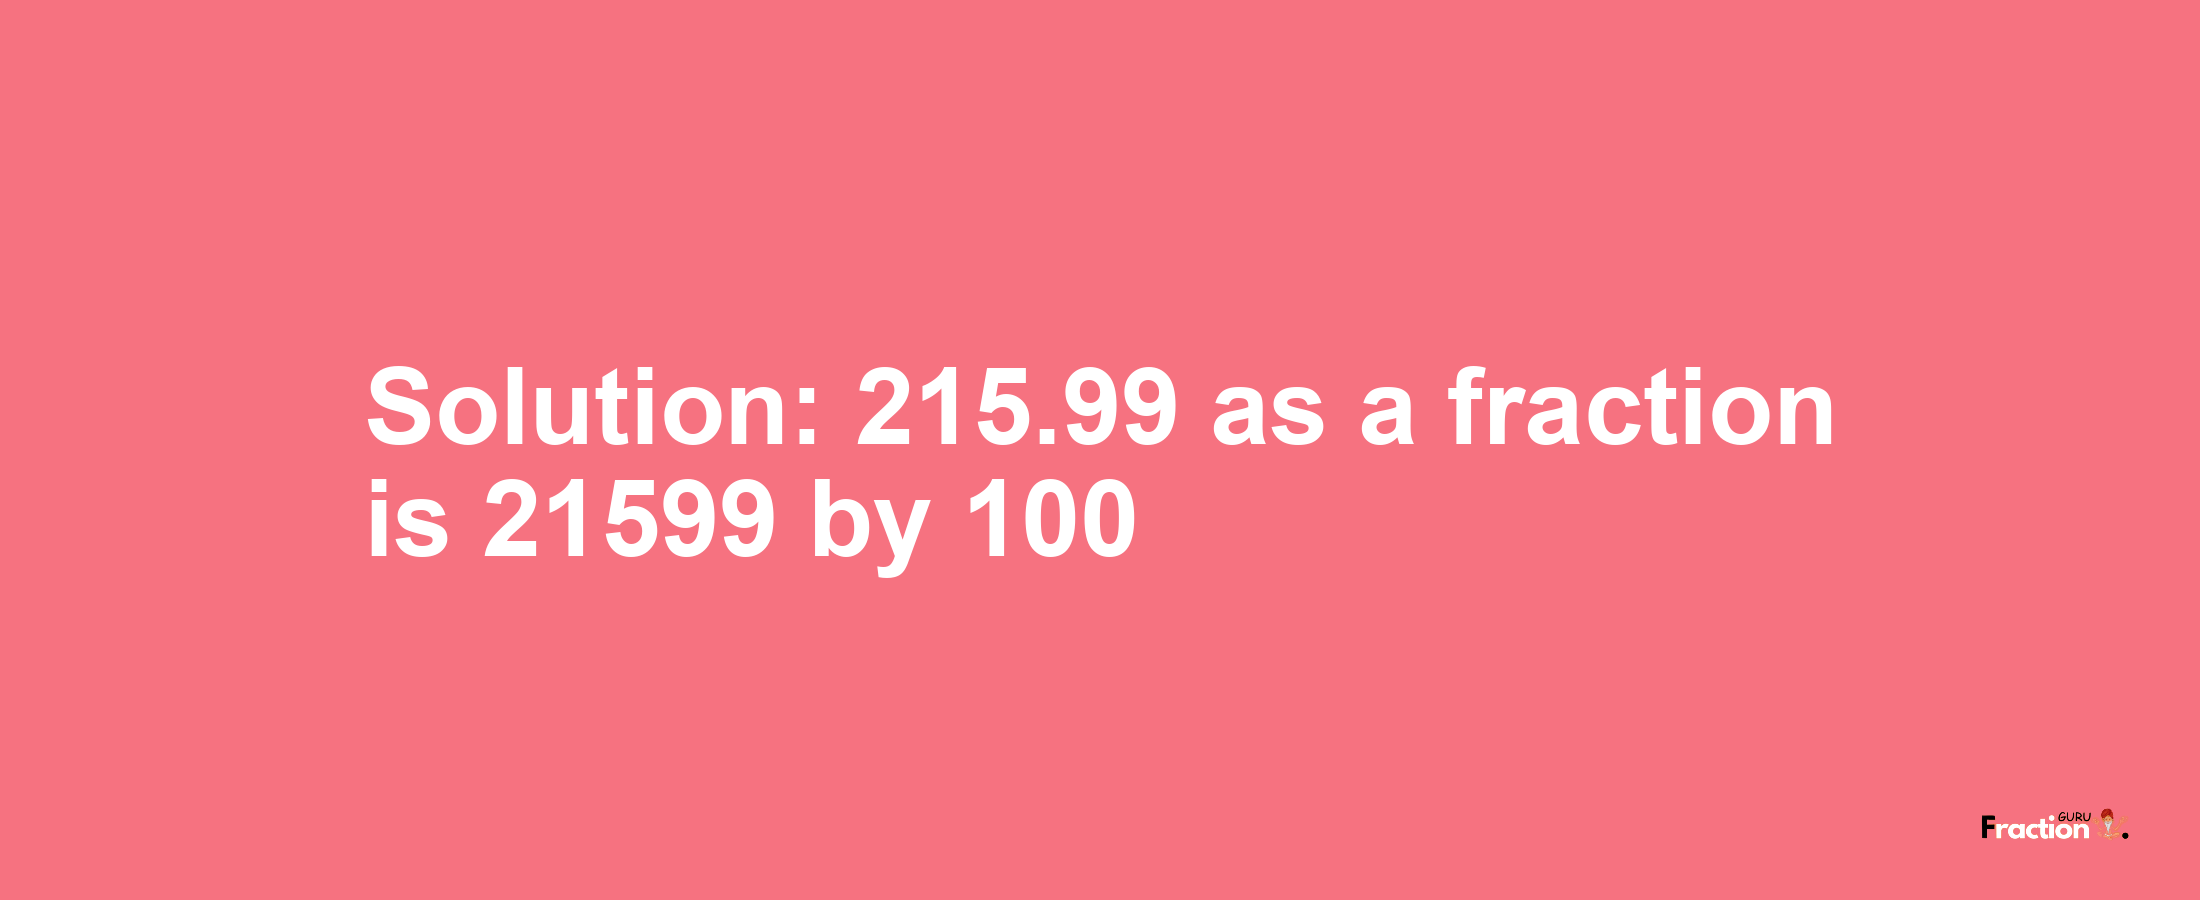 Solution:215.99 as a fraction is 21599/100